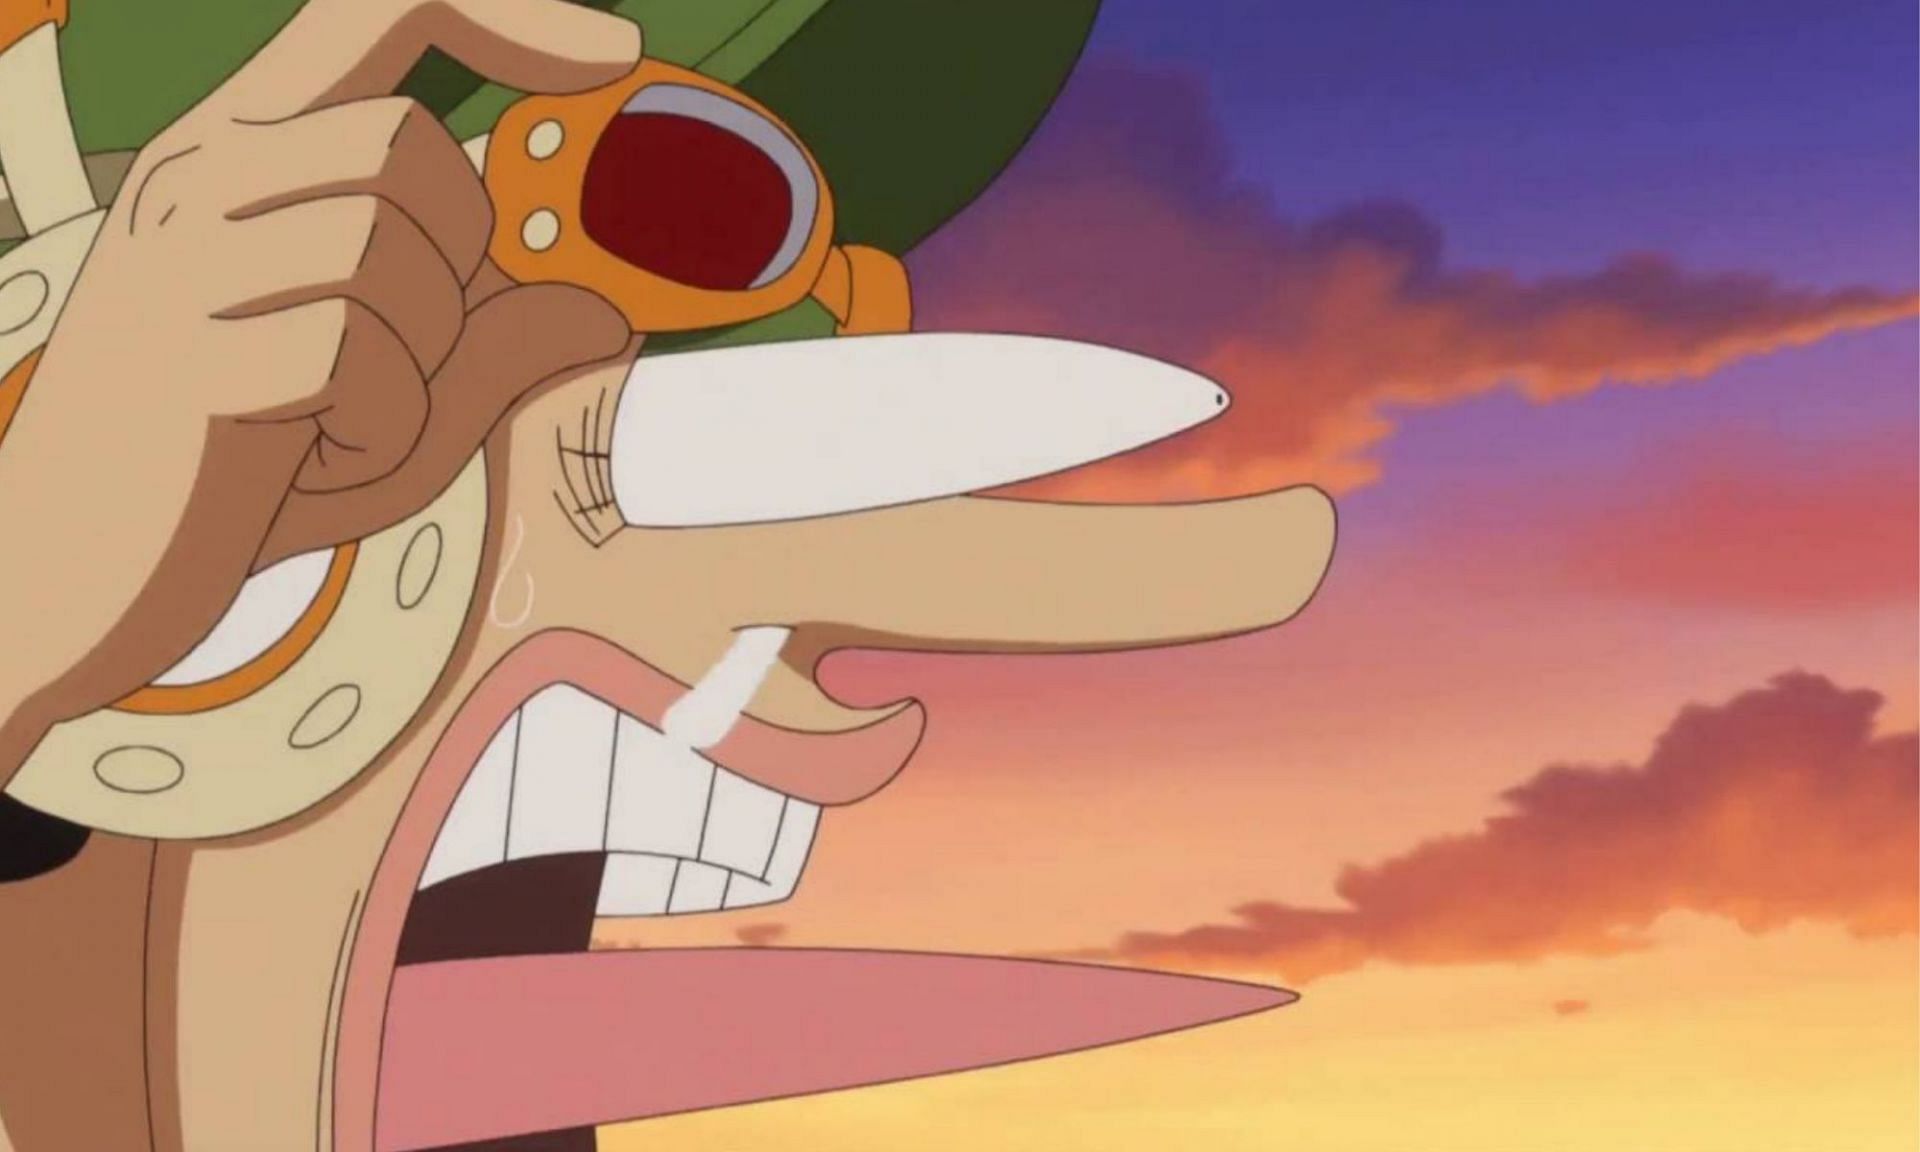 Usopp would prefer to avoid combat situations (Image via Toei Animation)